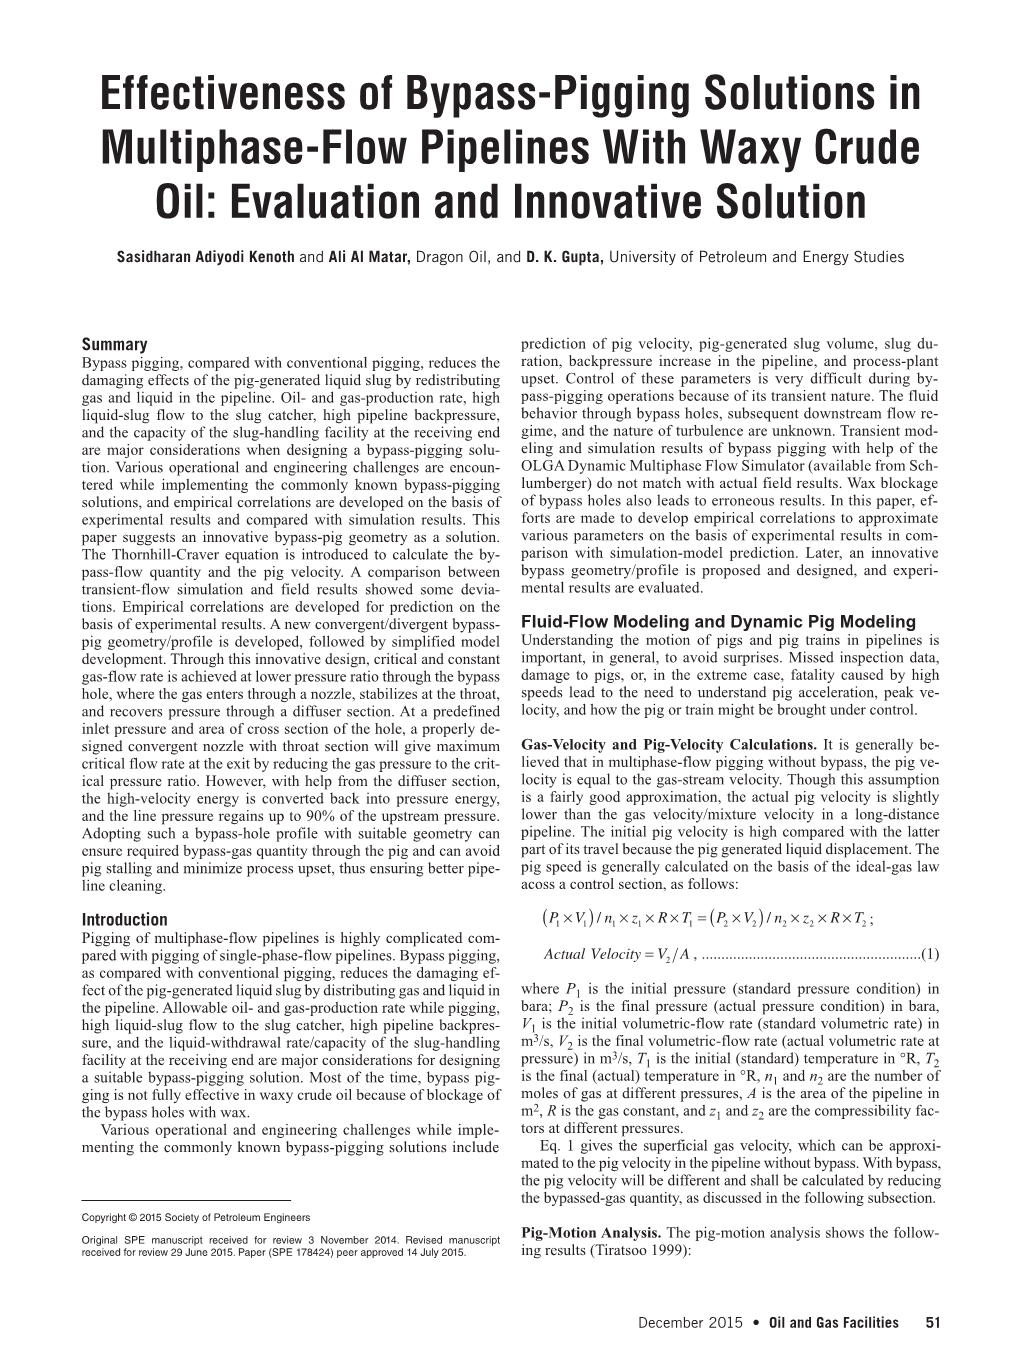 Effectiveness of Bypass-Pigging Solutions in Multiphase-Flow Pipelines with Waxy Crude Oil: Evaluation and Innovative Solution